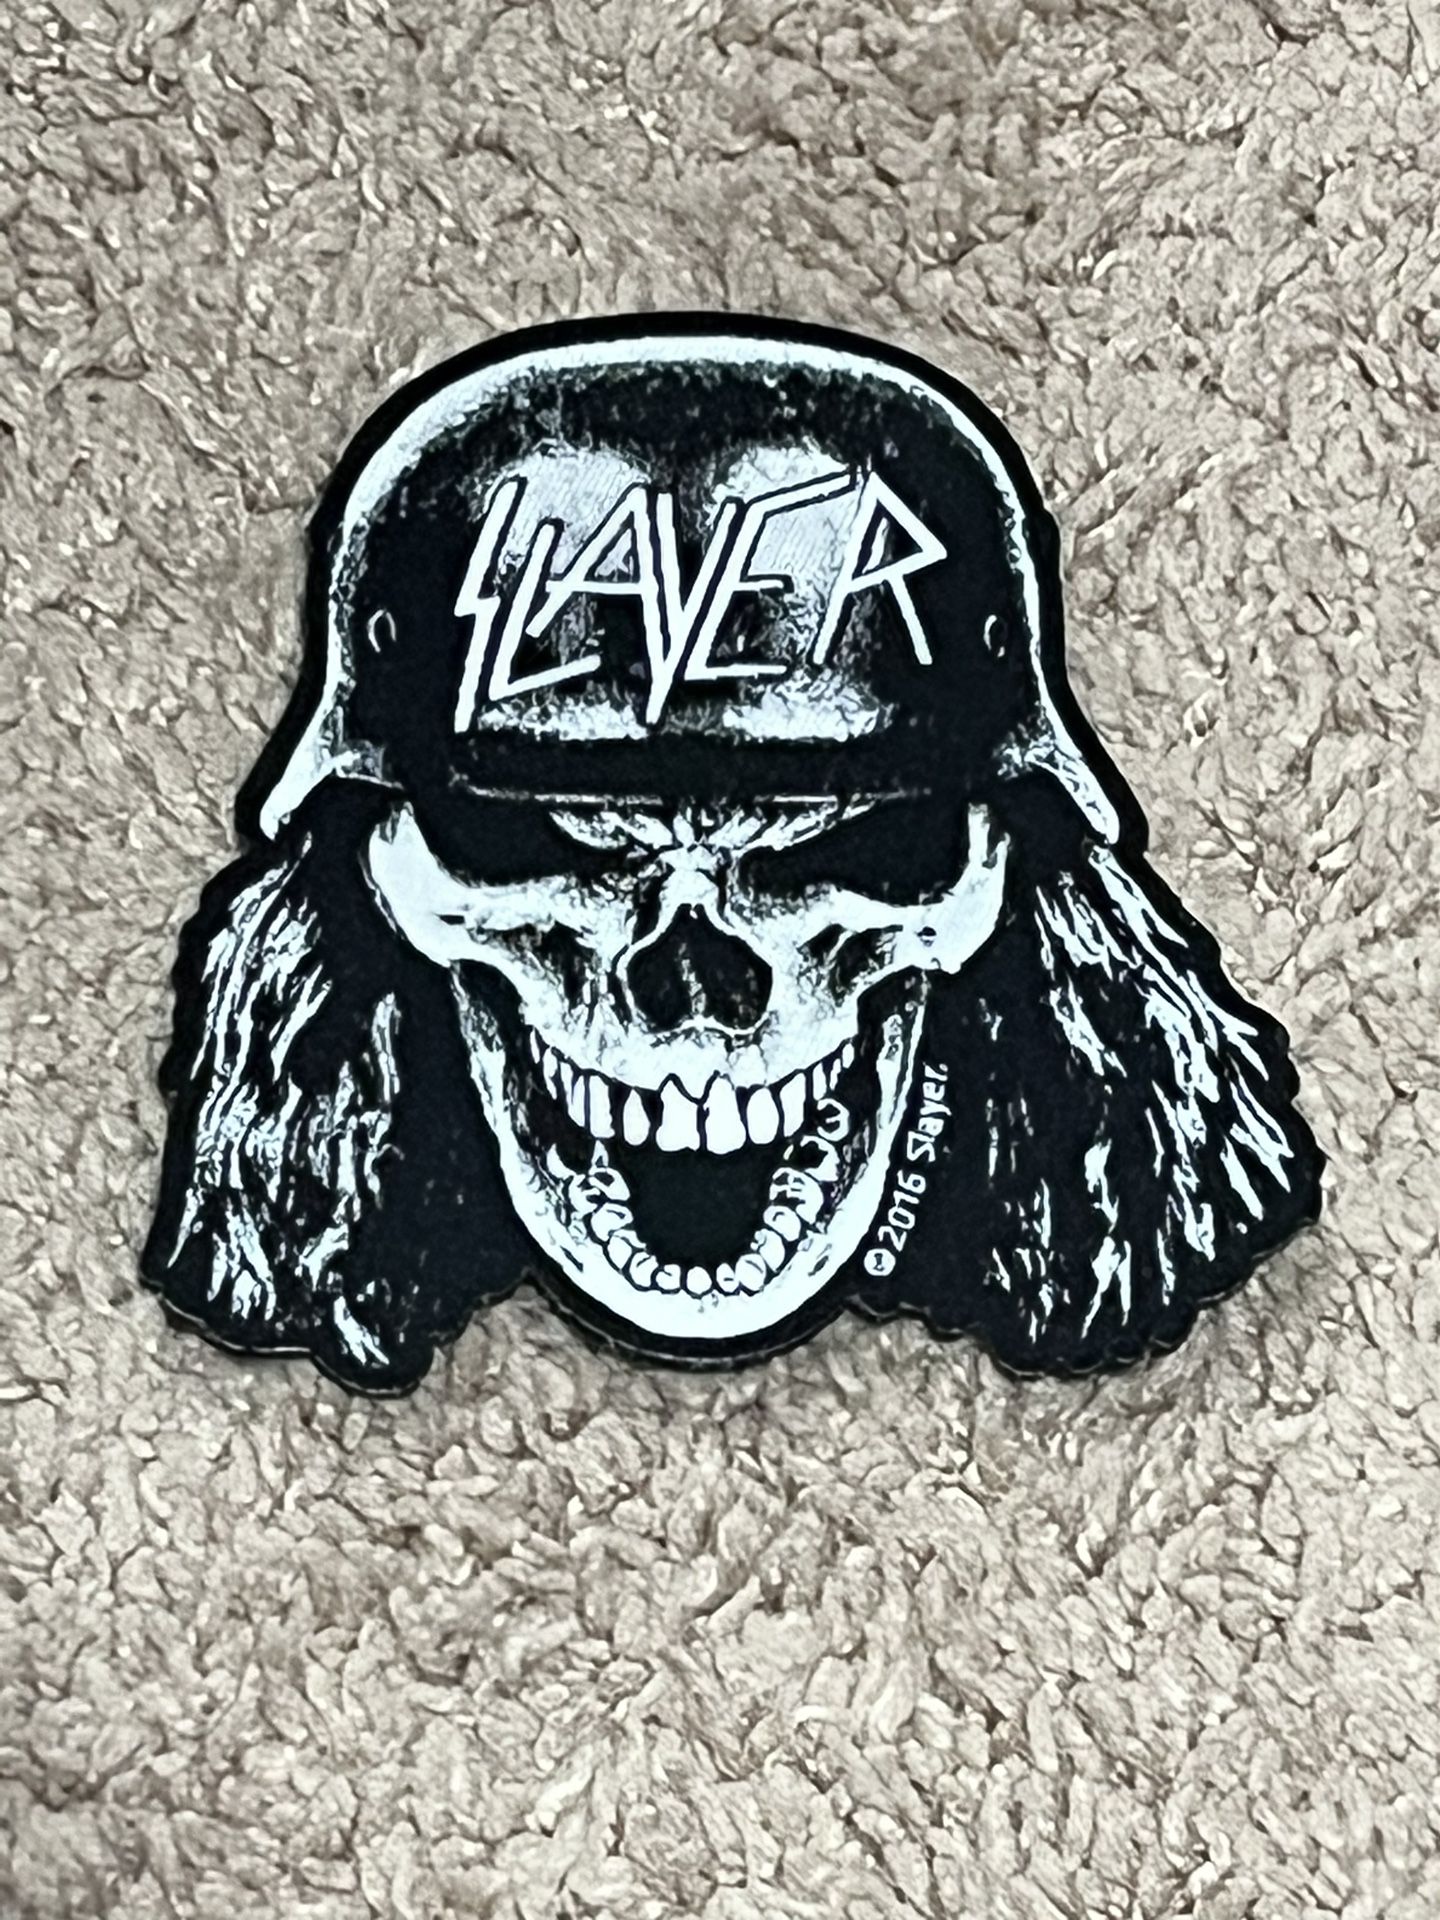 Slayer Wehrmacht Skull Patch for Sale in Martinsburg, WV - OfferUp